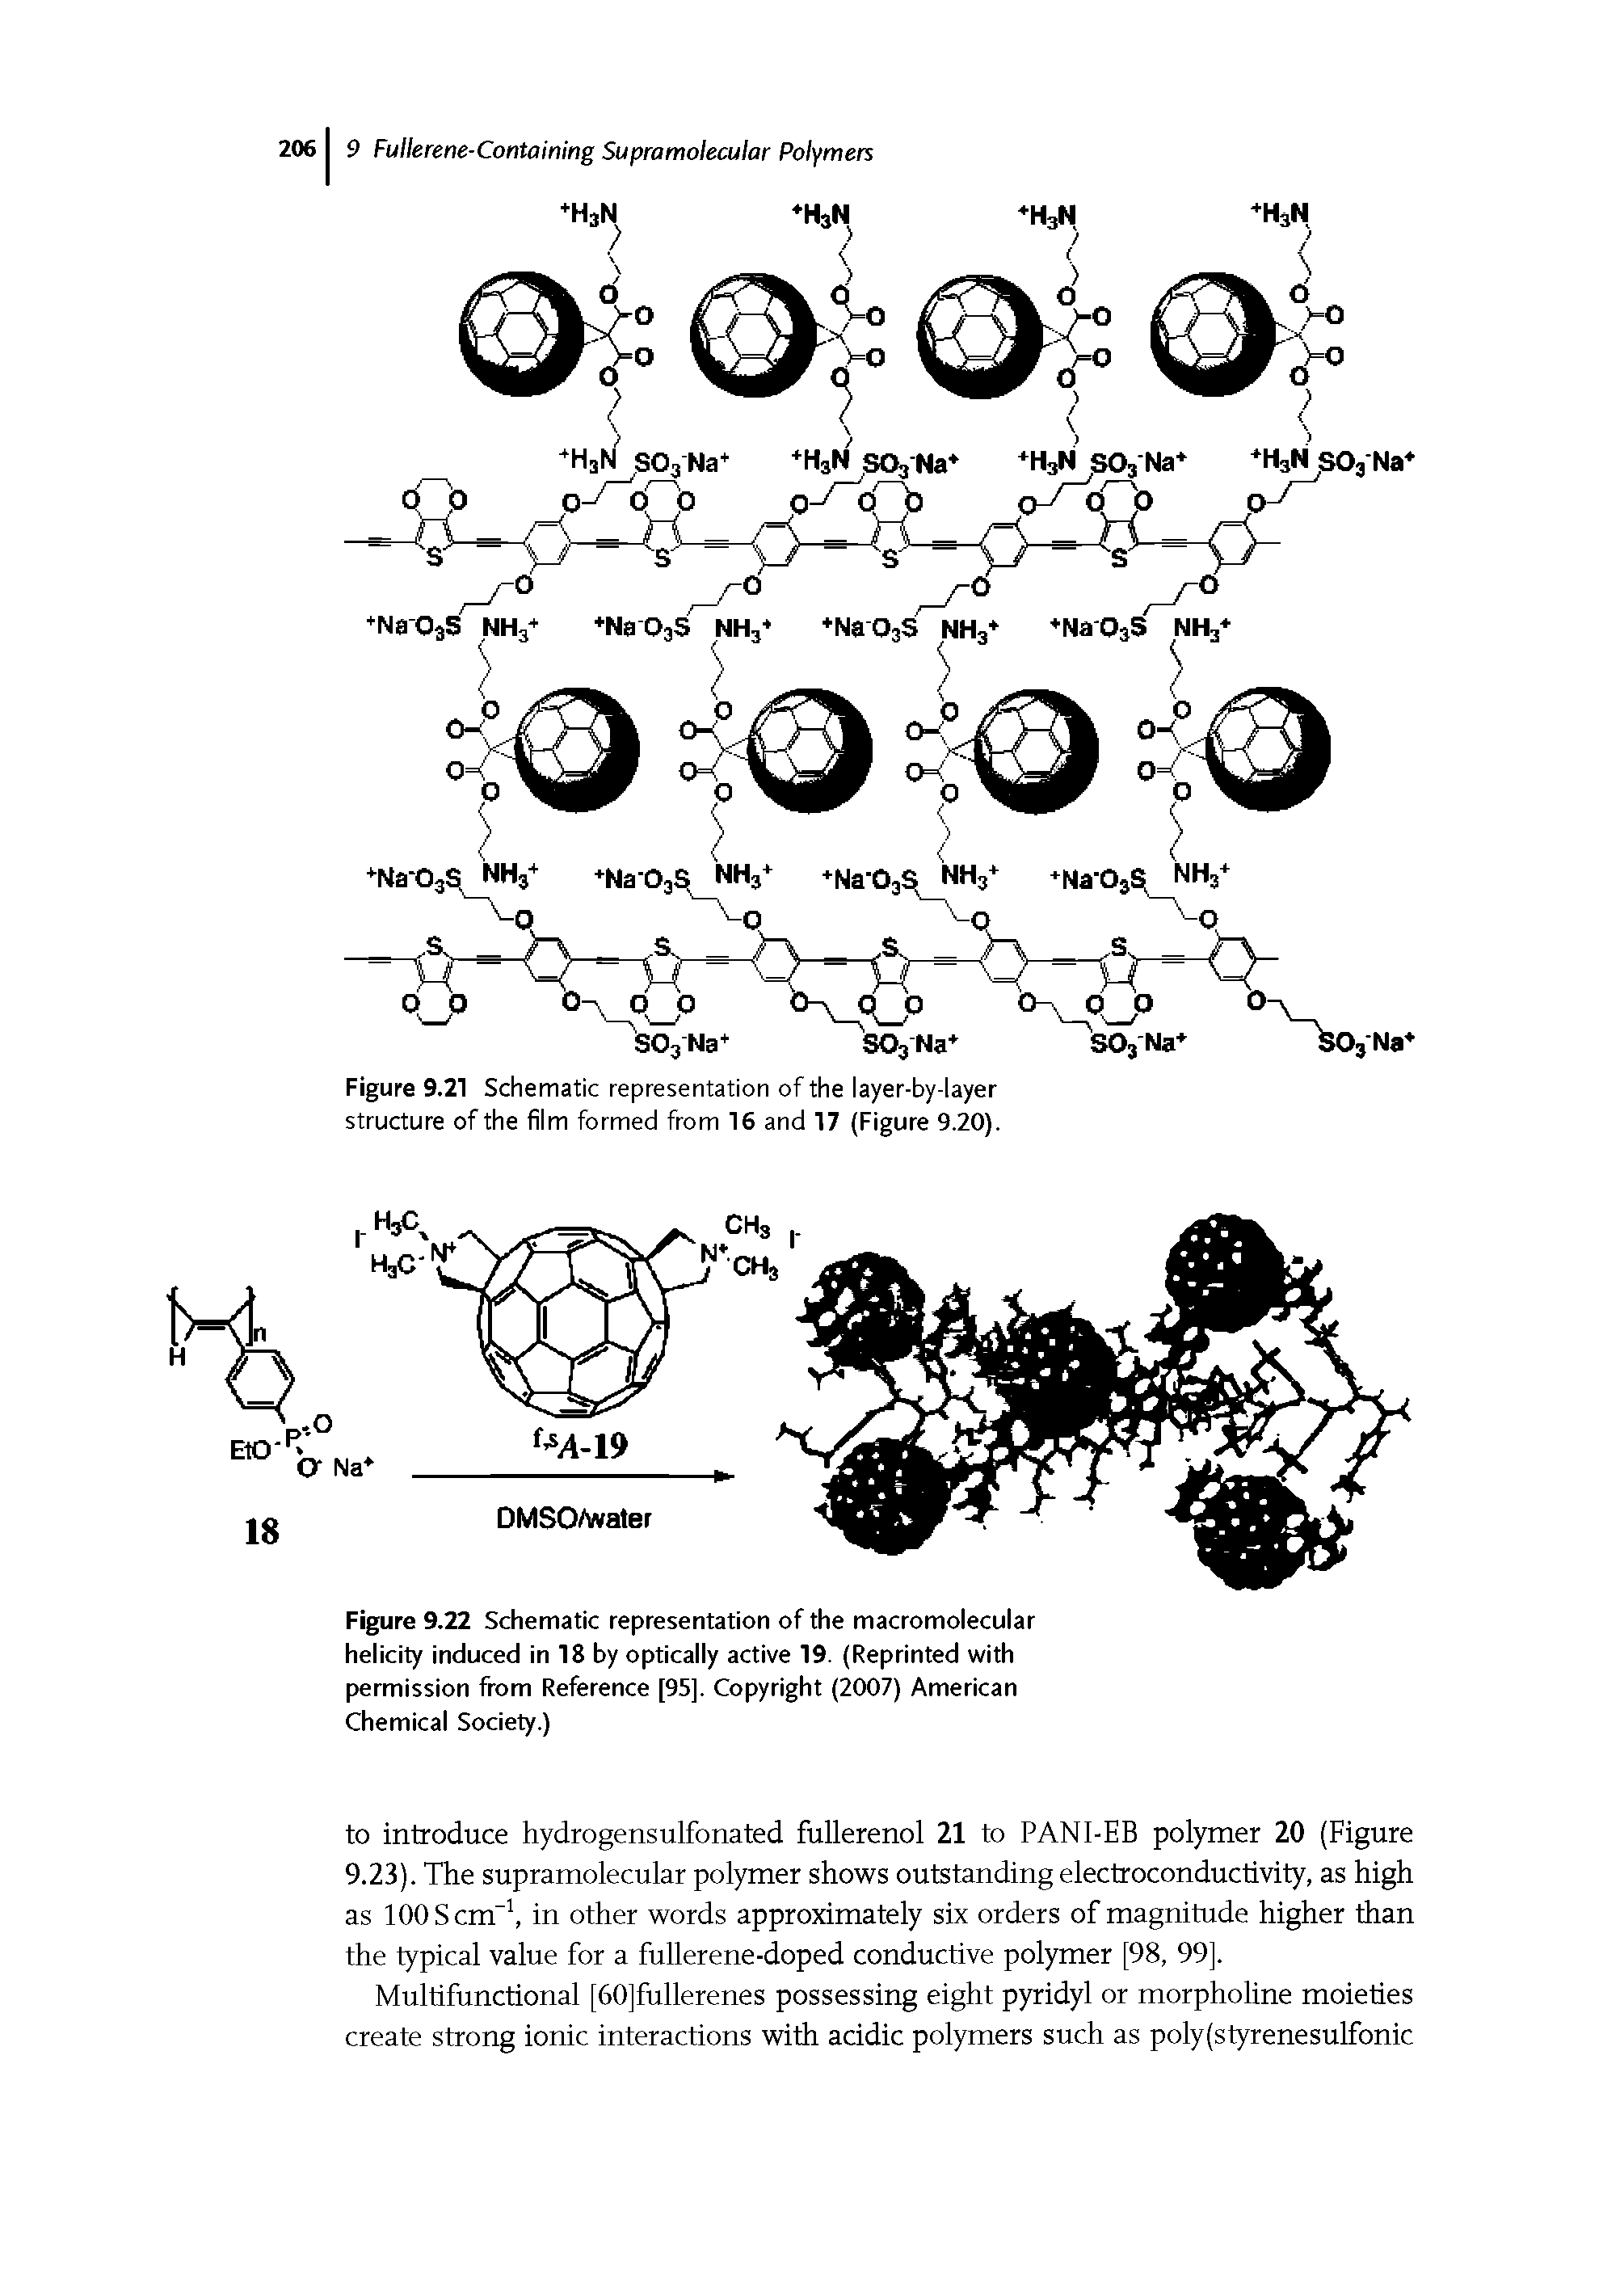 Figure 9.22 Schematic representation of the macromolecular helicity induced in 18 by optically active 19. (Reprinted with permission from Reference [95]. Copyright (2007) American Chemical Society.)...